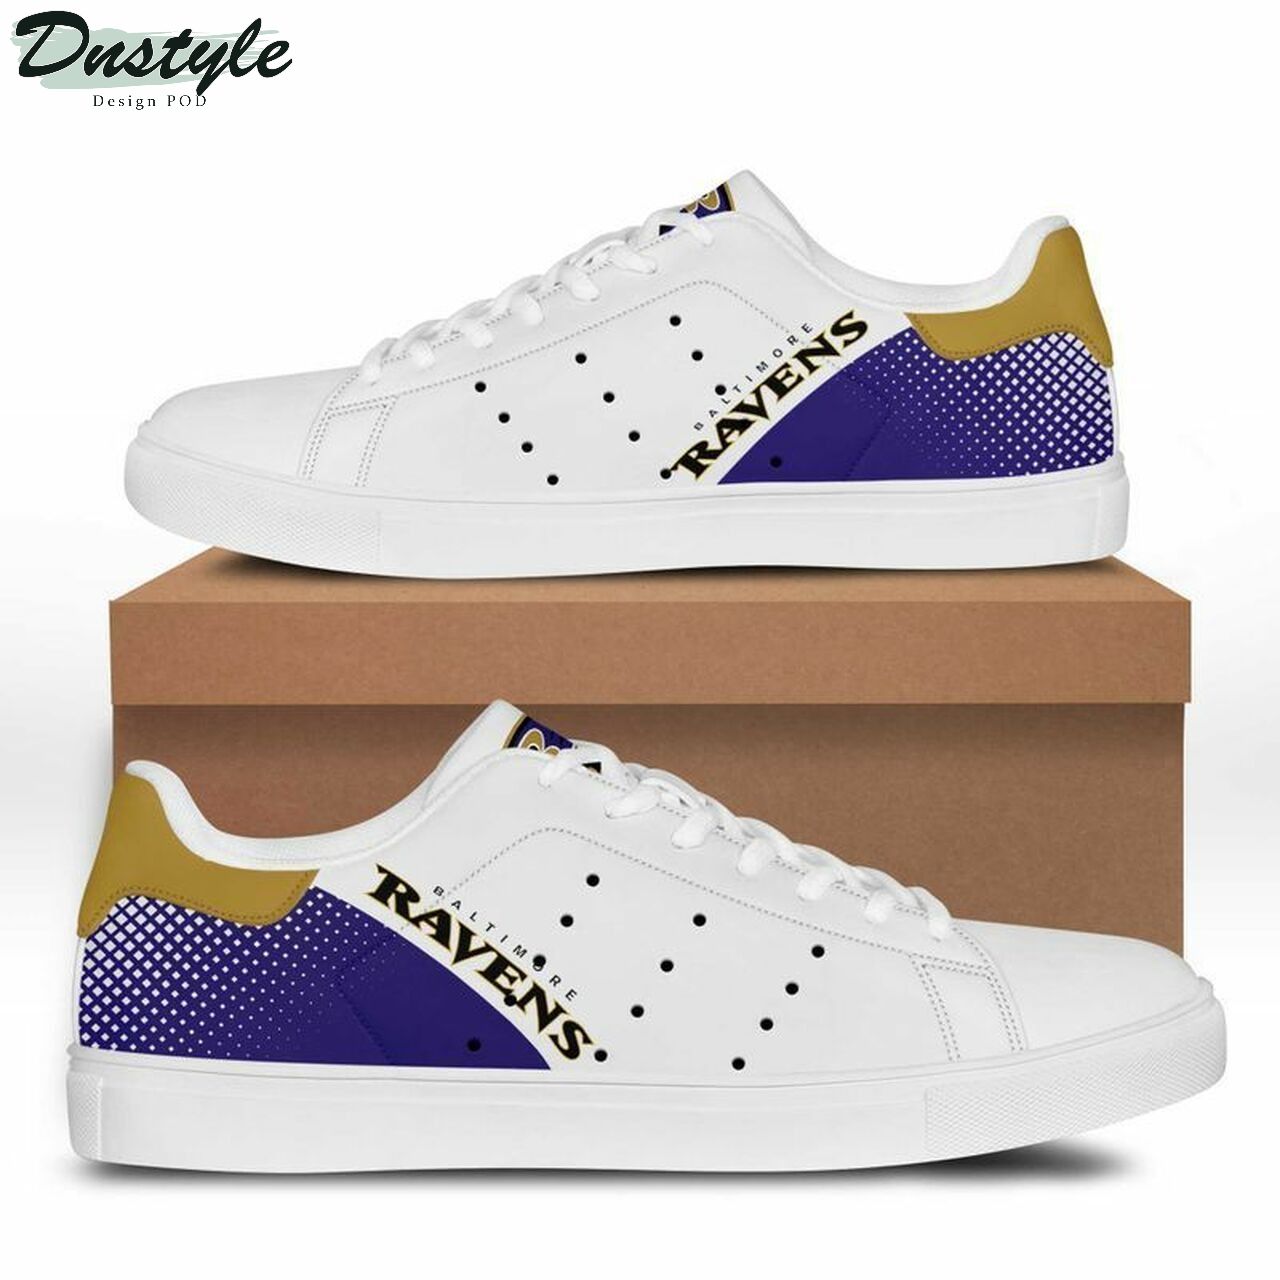 NFL Baltimore Ravens stan smith low top skate shoes